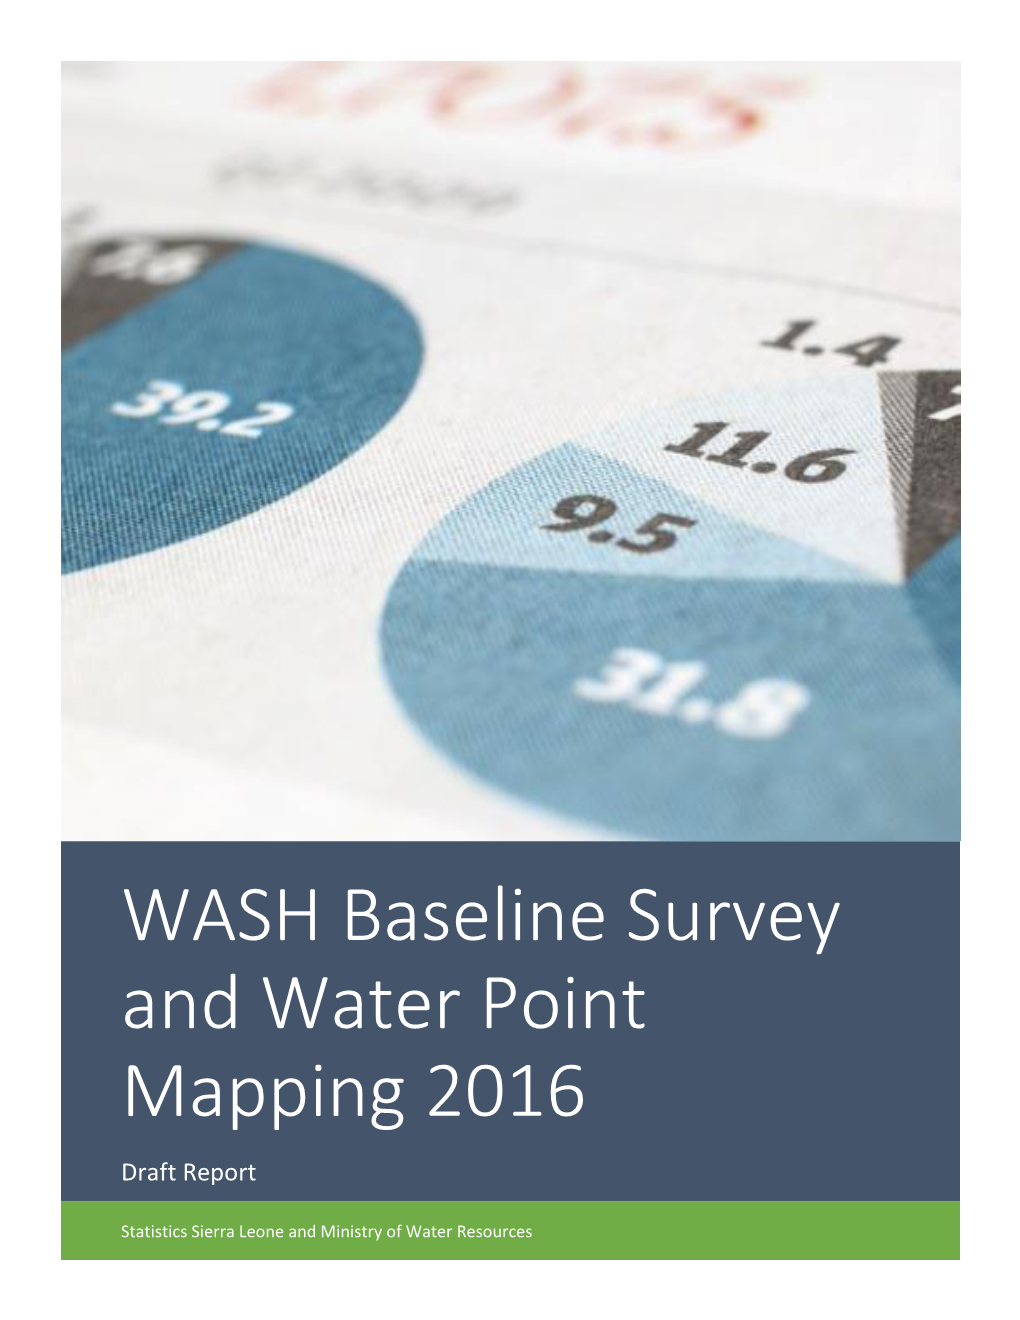 WASH Baseline Survey and Water Point Mapping 2016 Draft Report